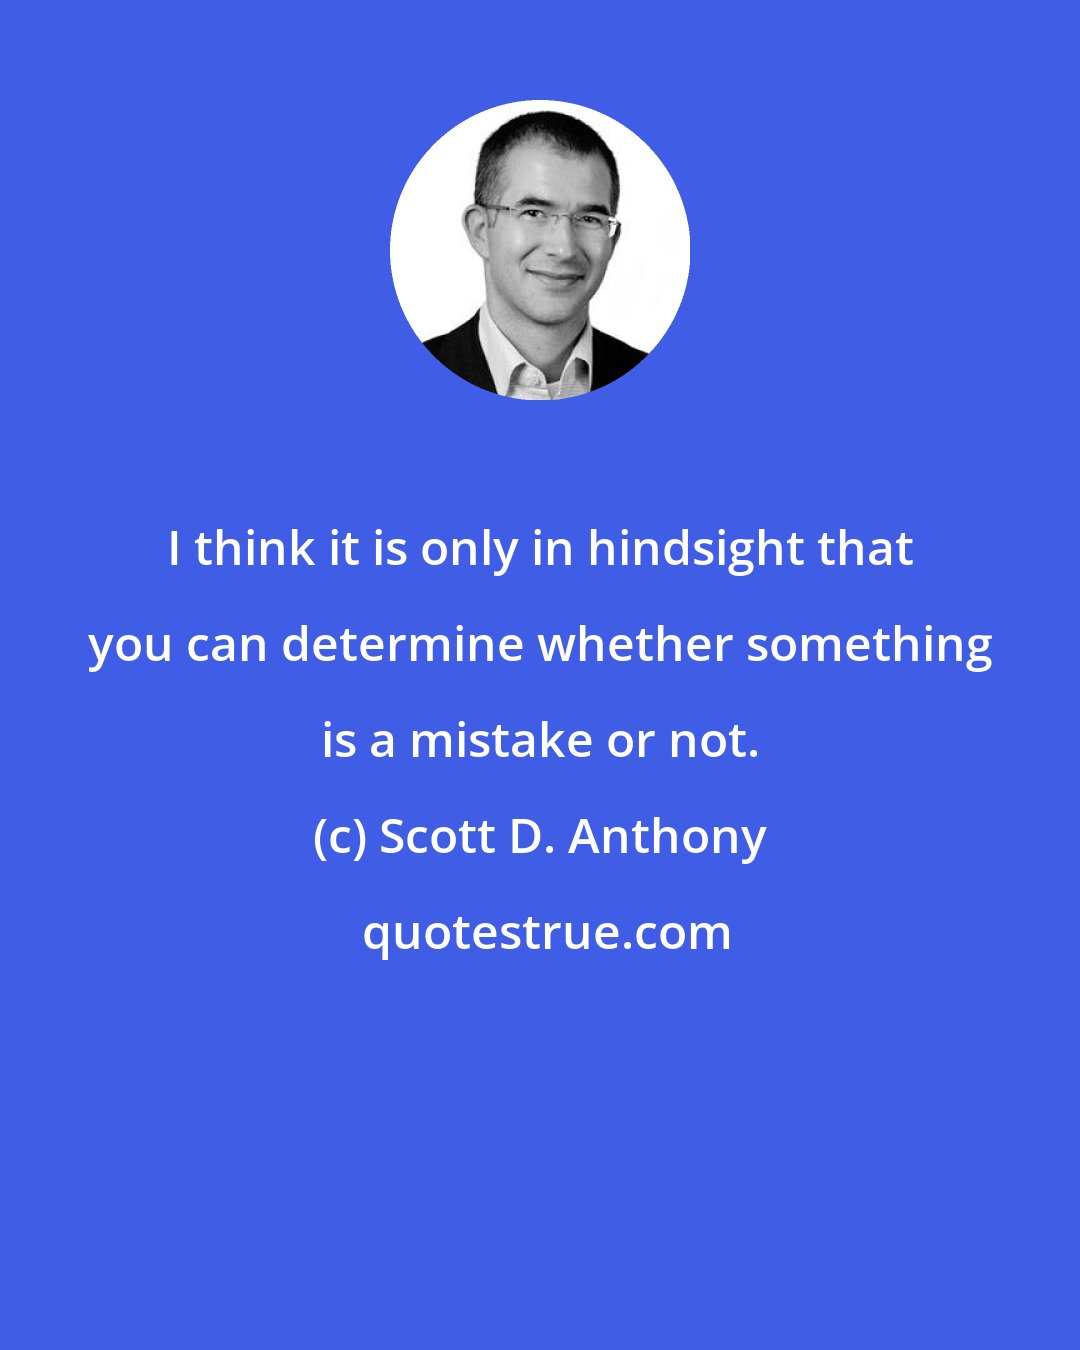 Scott D. Anthony: I think it is only in hindsight that you can determine whether something is a mistake or not.